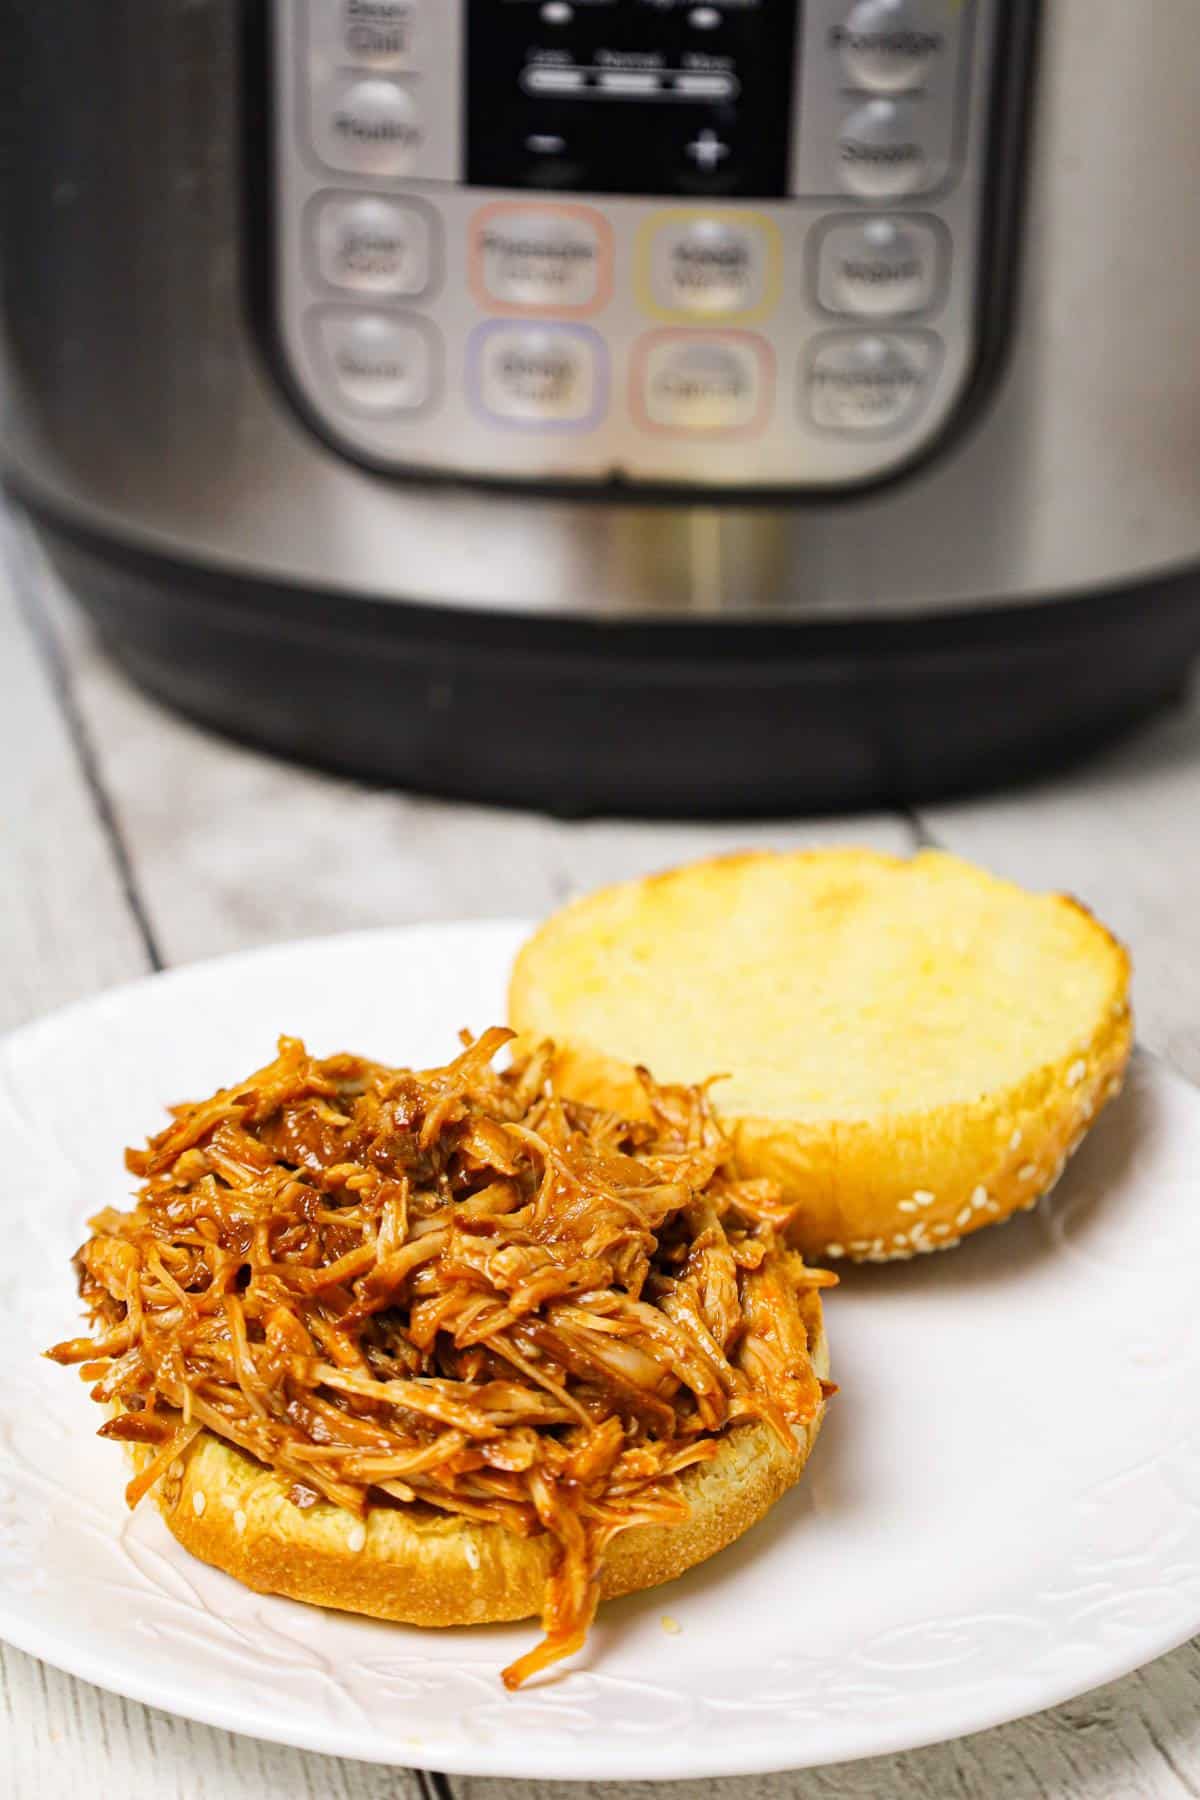 Instant Pot Pulled Pork is an easy and delicious dinner made with a boneless pork roast pressure cooked in apple juice and BBQ sauce.